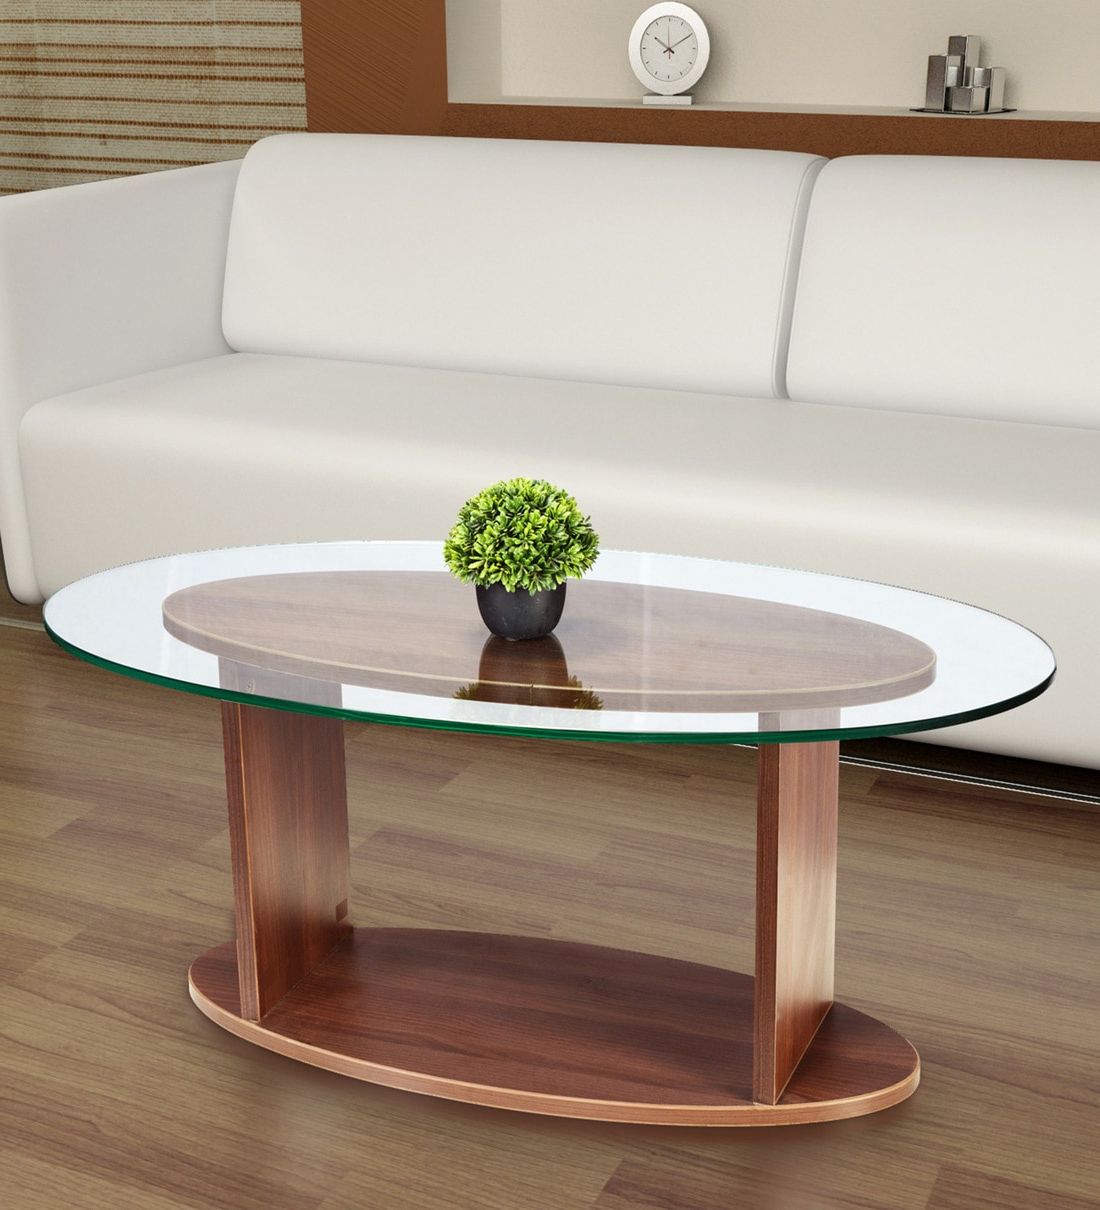 Latest Glass And Pewter Coffee Tables In Buy Oval Shaped Glass Top Coffee Table In Walnut Finishaddy Design (View 10 of 10)